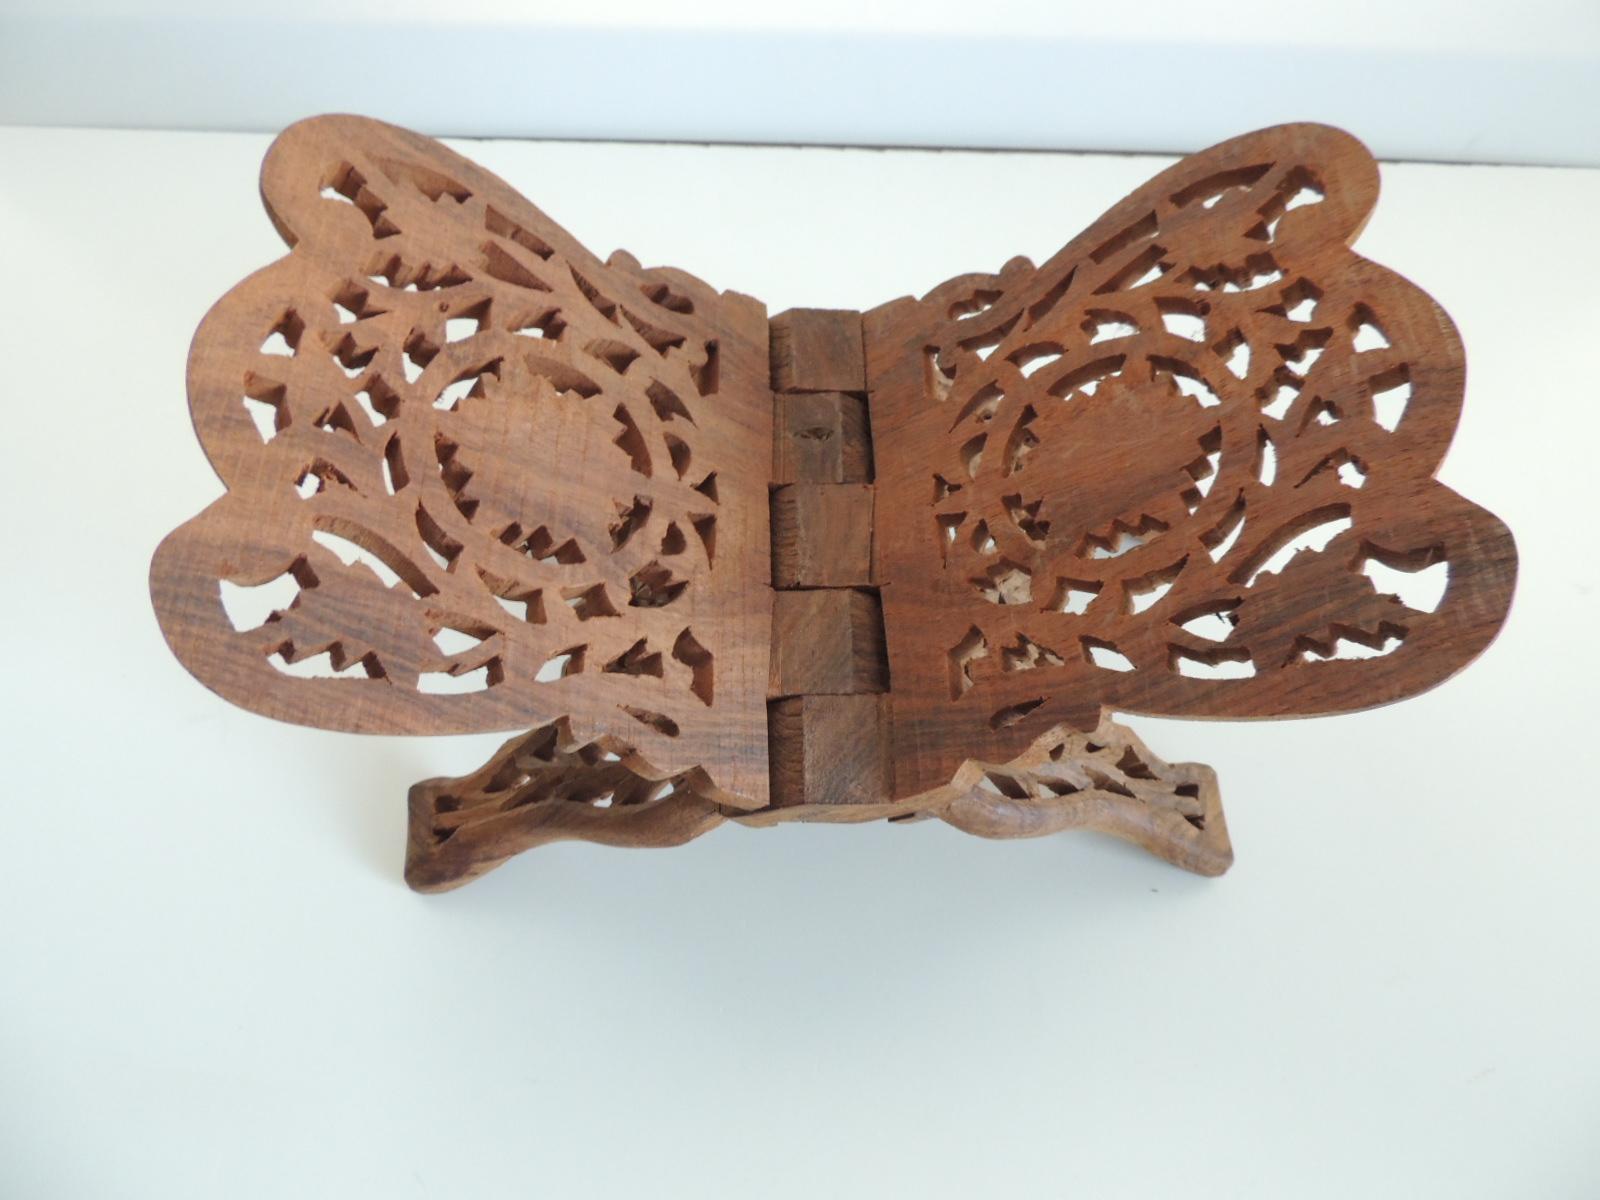 Folding Indian hand carved book display or stand.
Size: 11